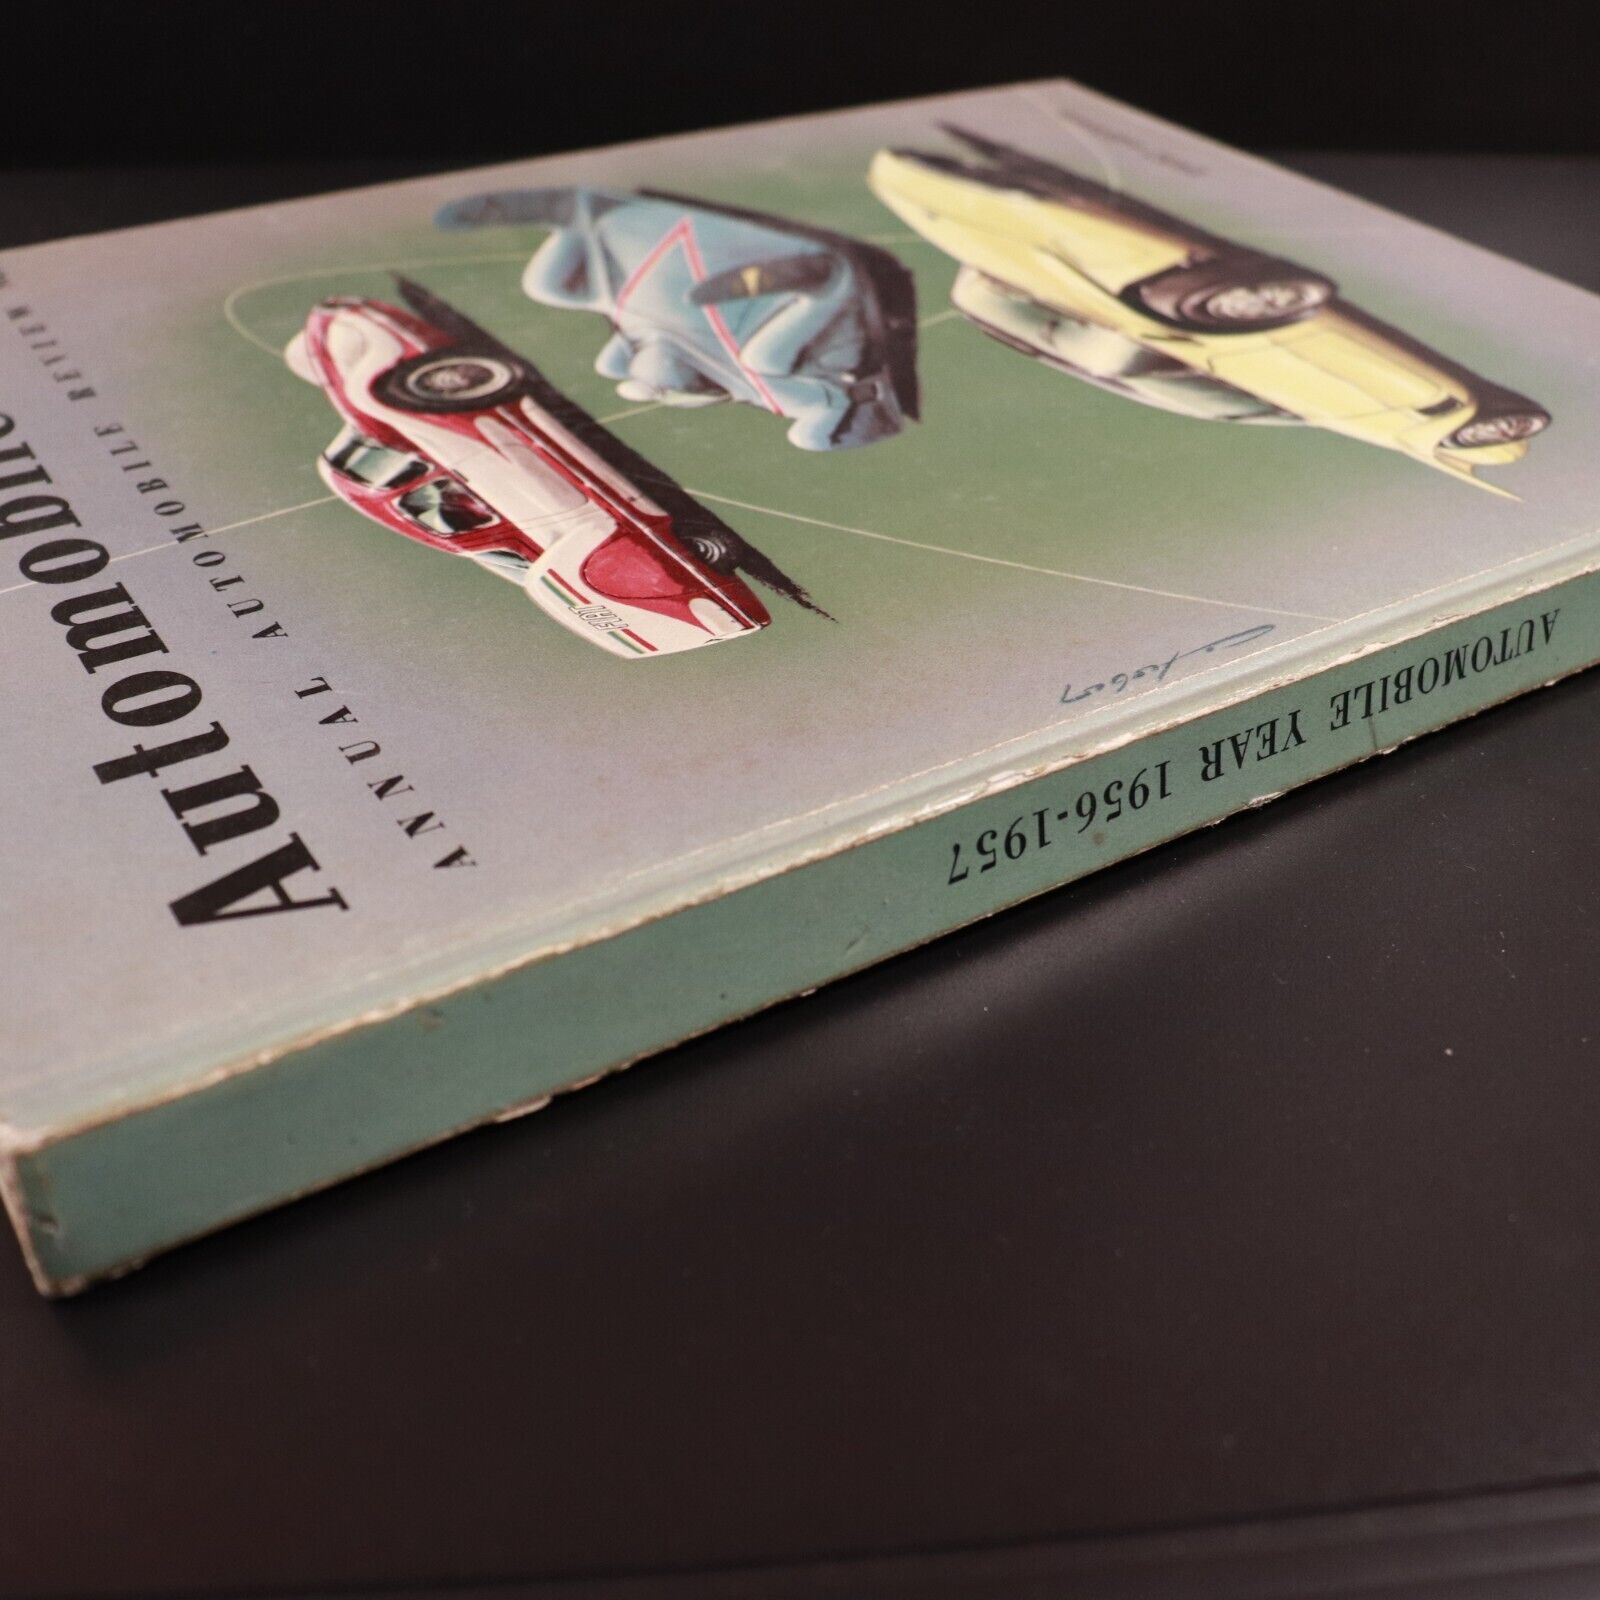 1957 Automobile Year For 1957 A. Guichard Vintage Illustrated Automotive Book